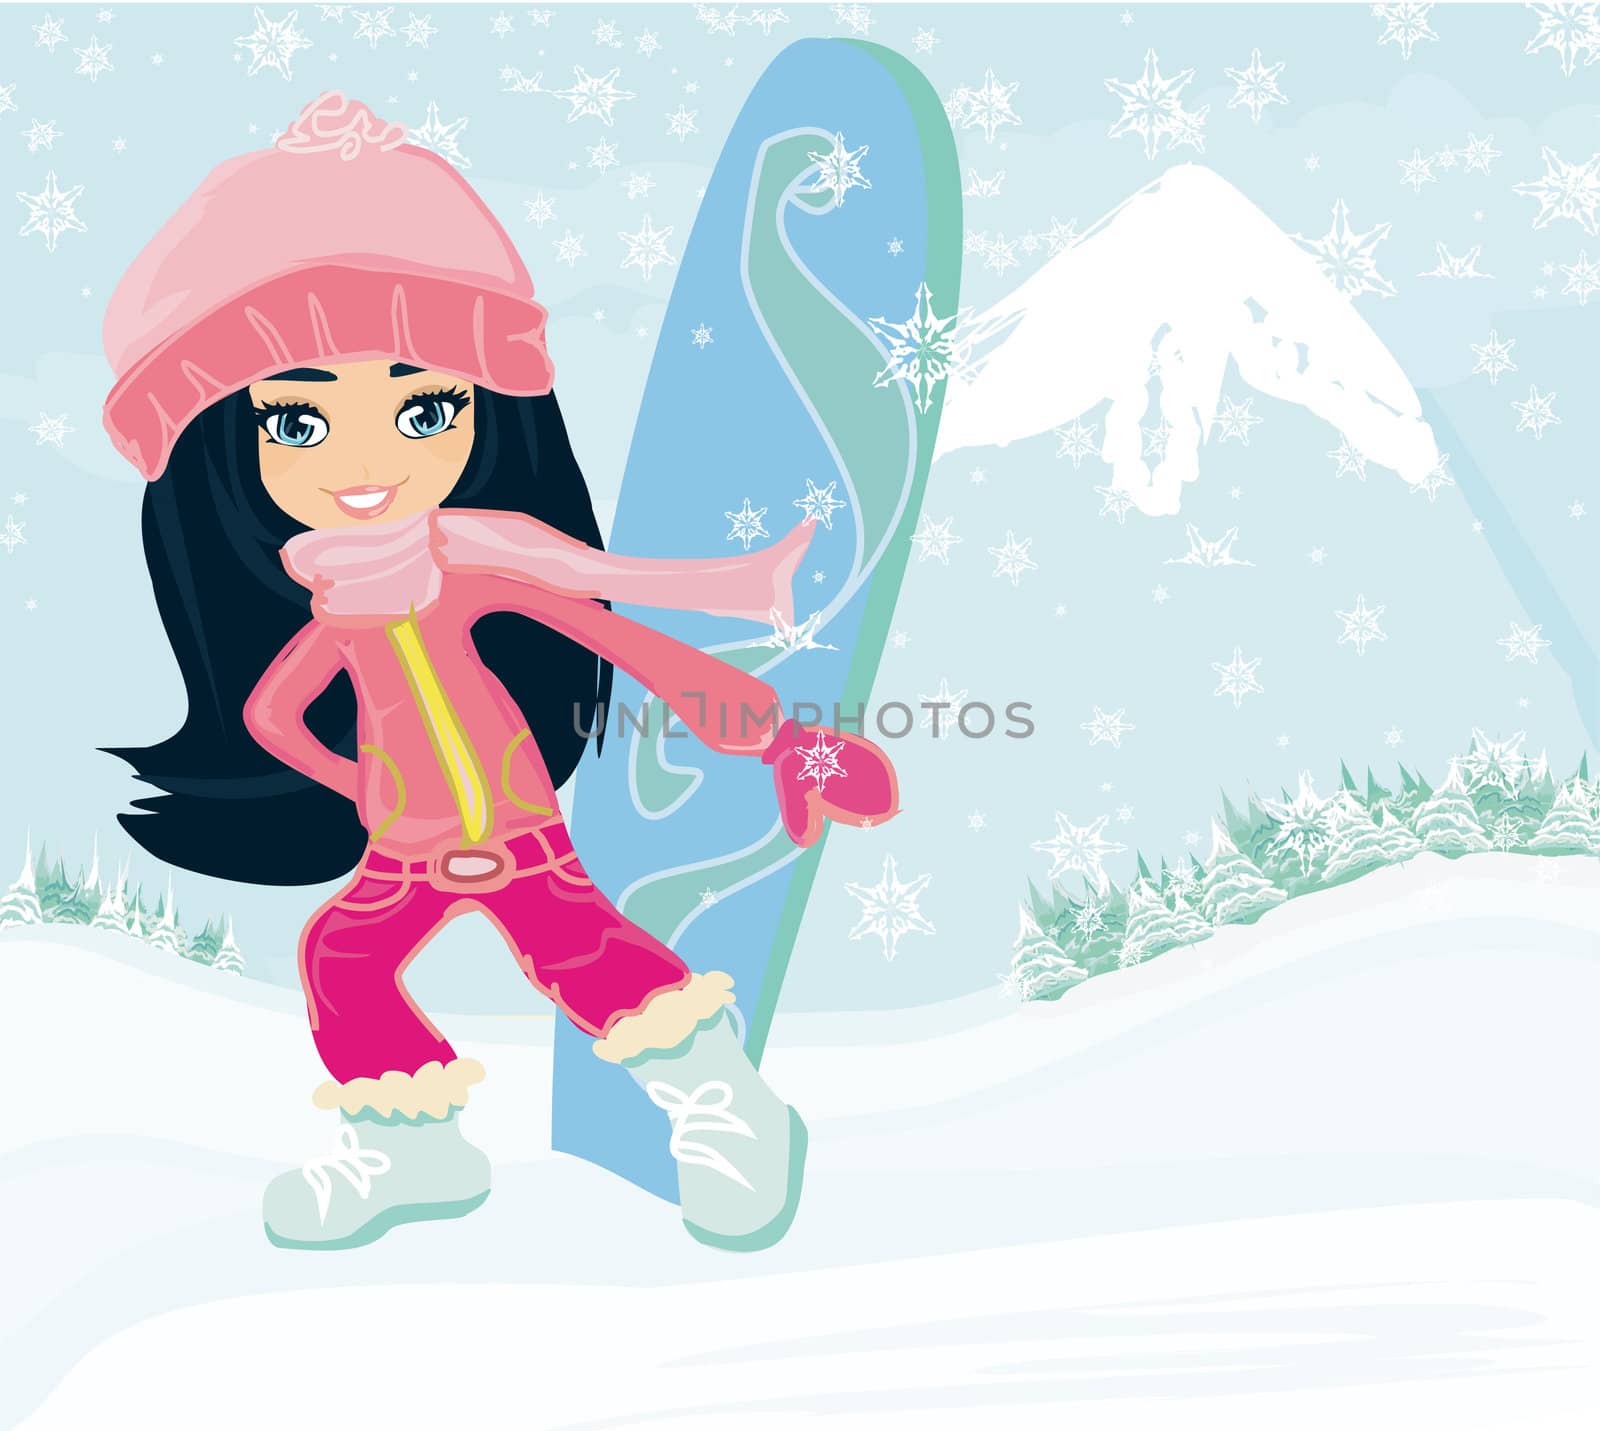 Girl with the snowboard